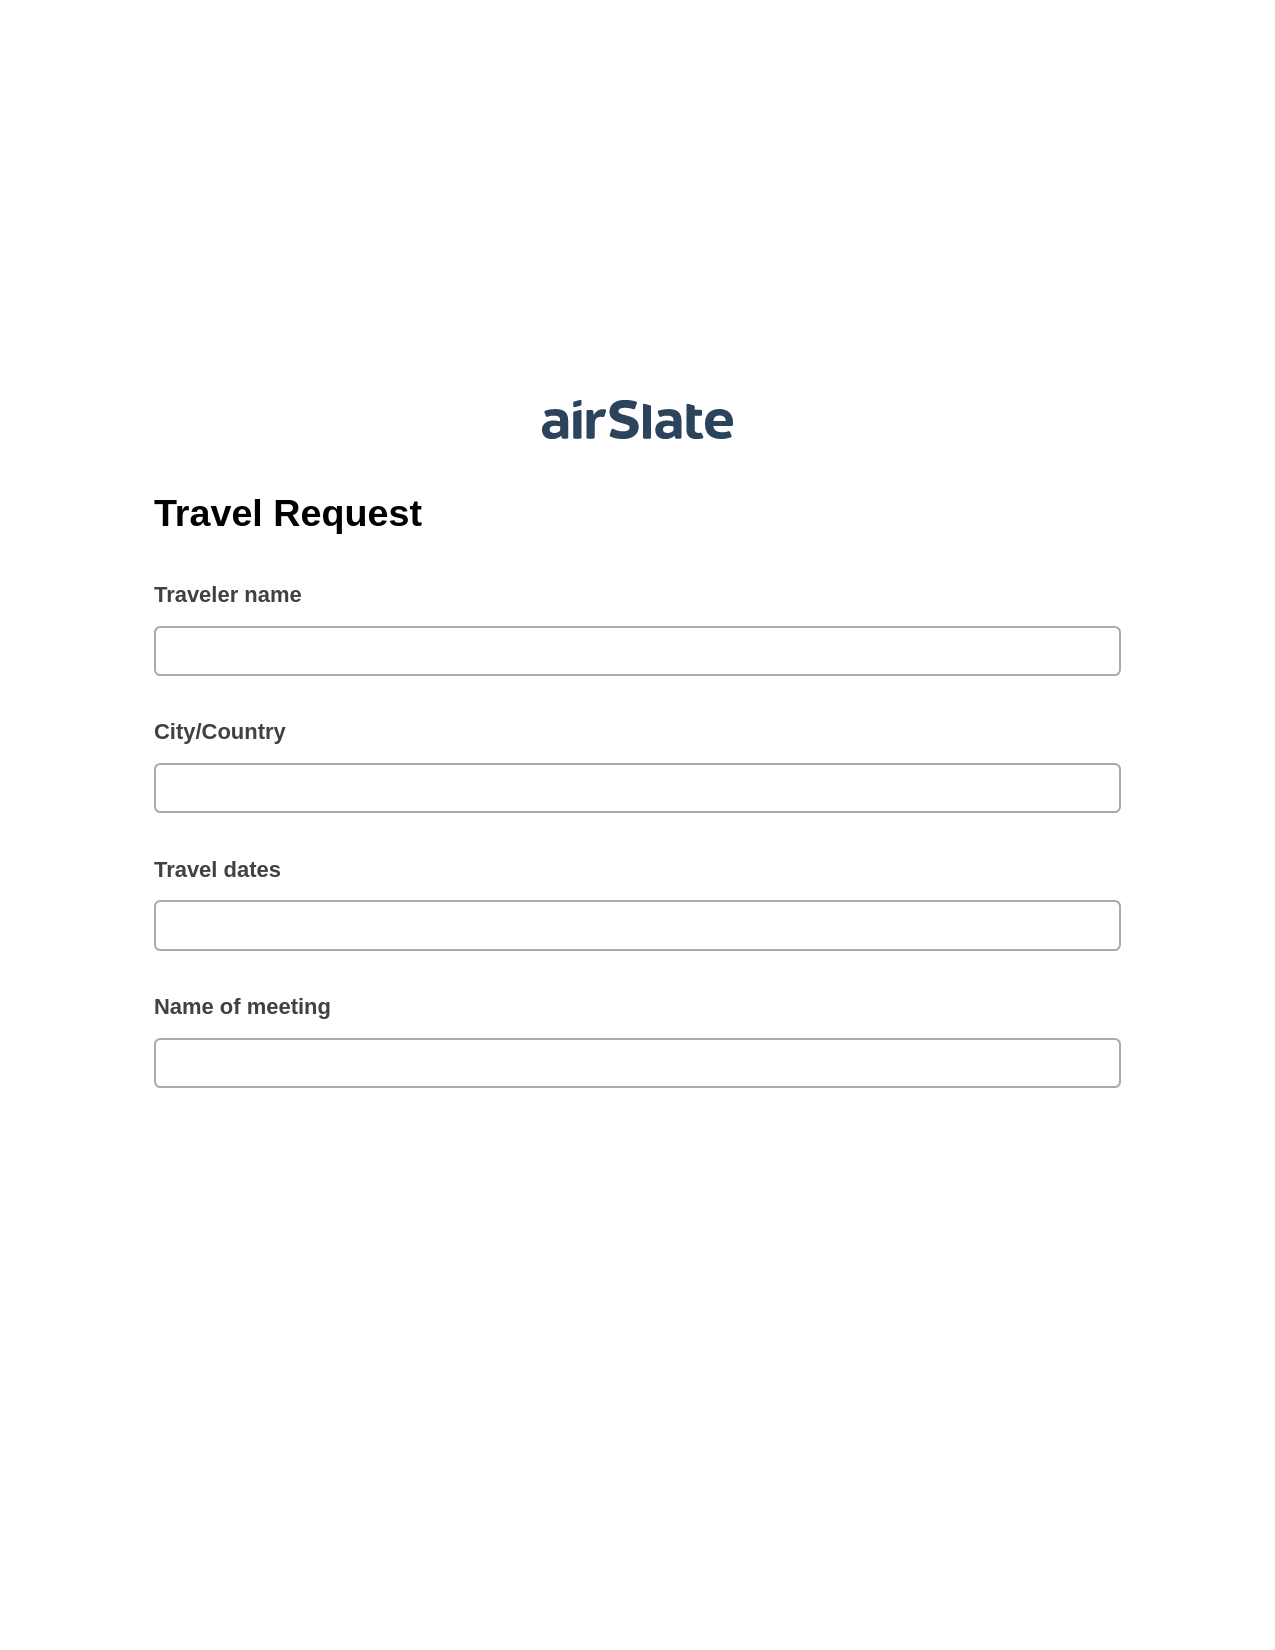 Travel Request Pre-fill Dropdowns from CSV File Bot, Pre-fill with Custom Data Bot, Archive to SharePoint Folder Bot